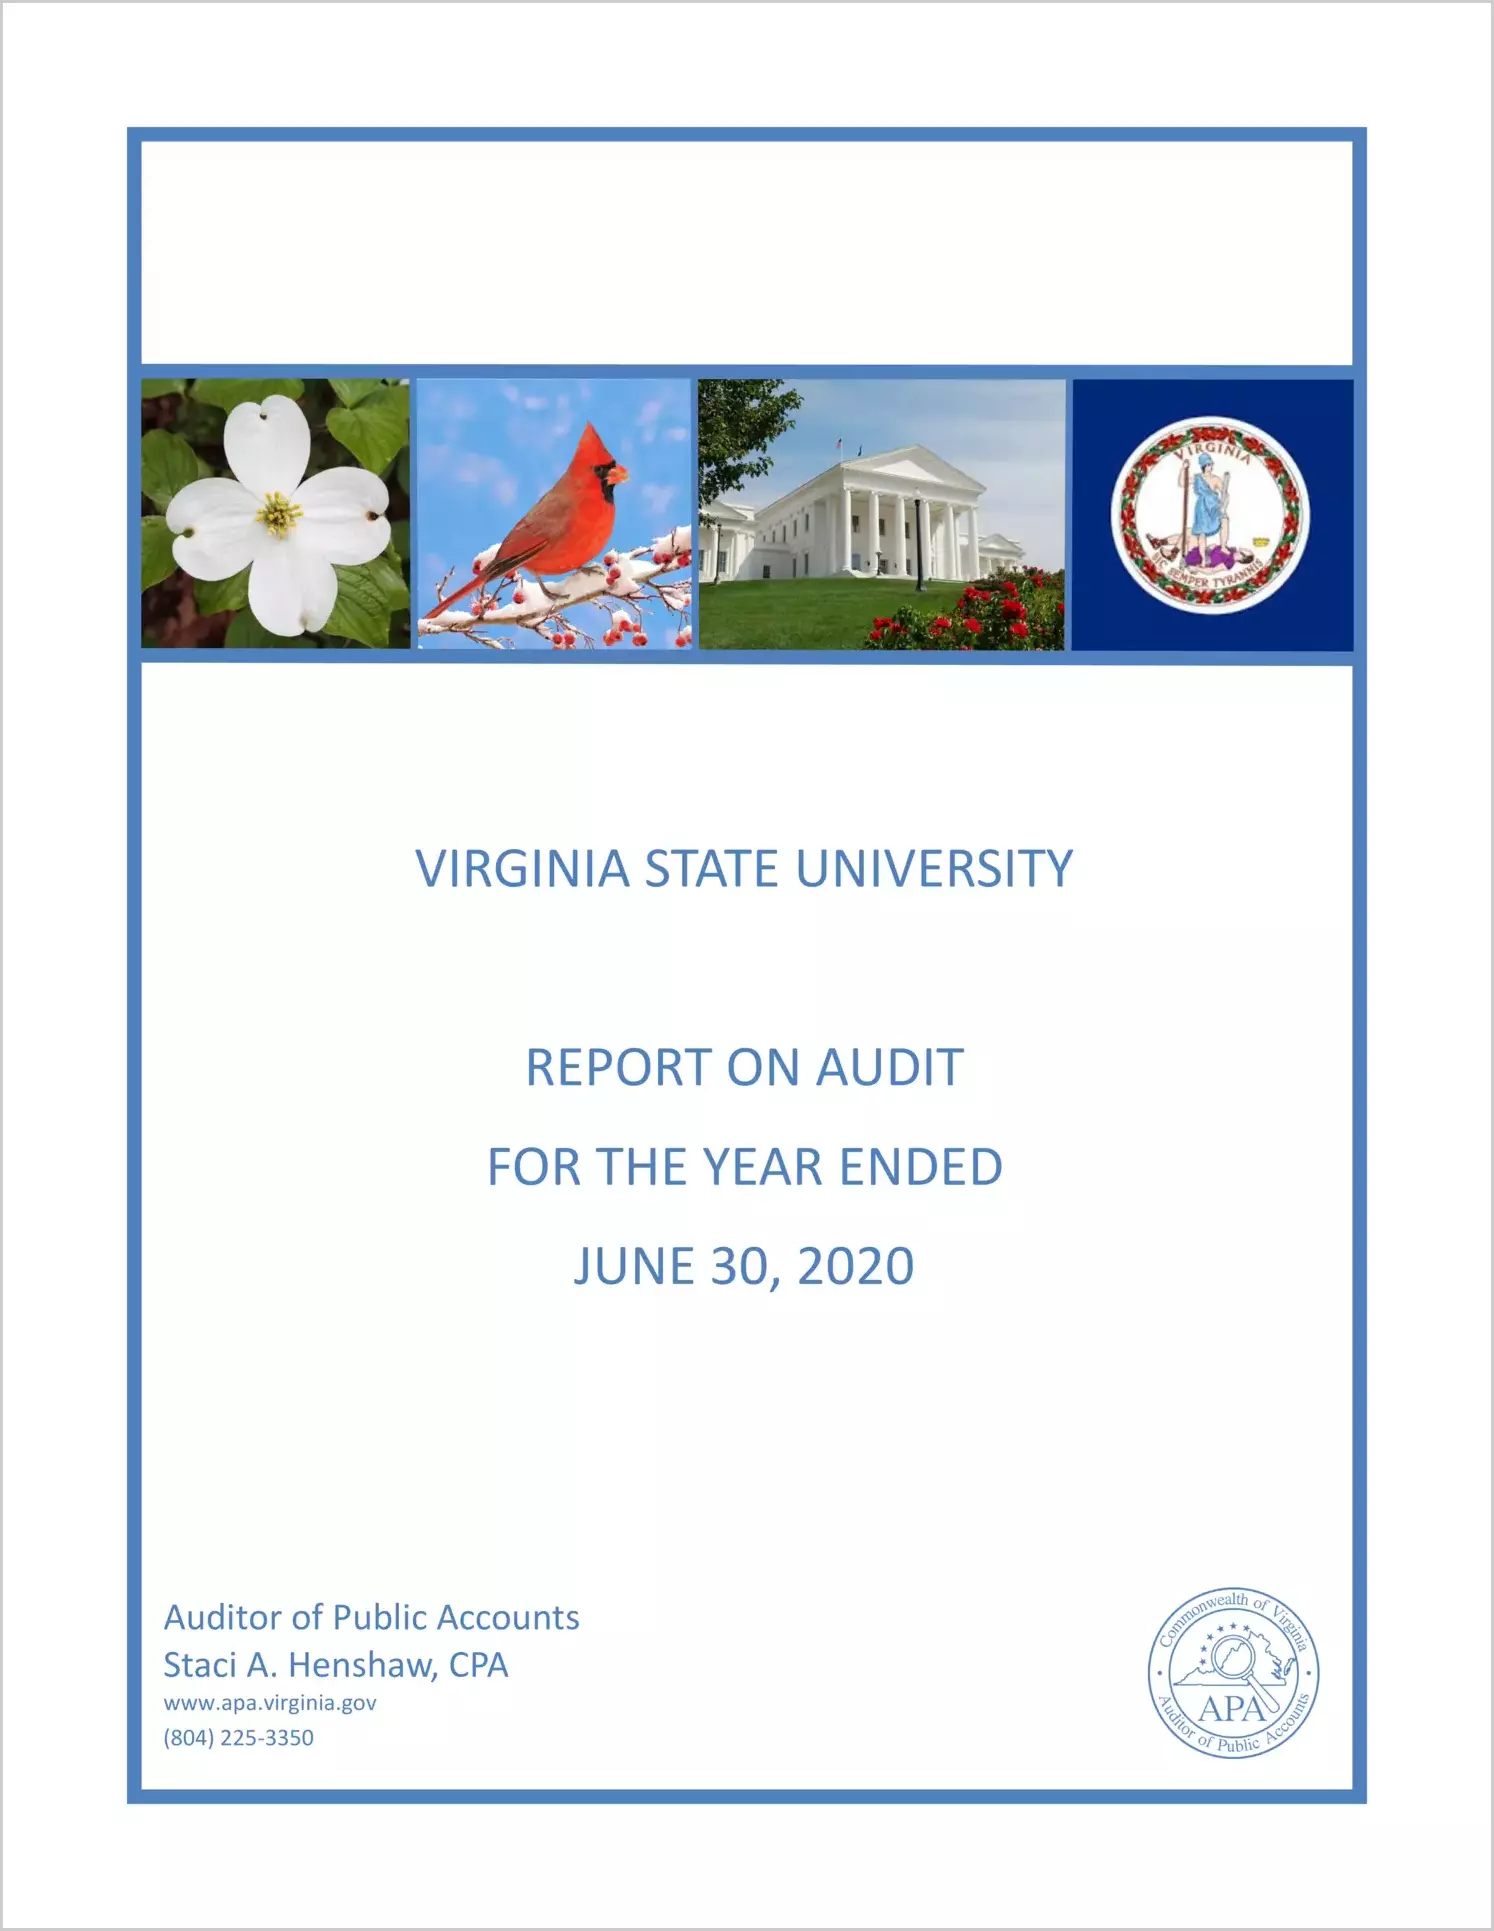 Virginia State University for the year ended June 30, 2020